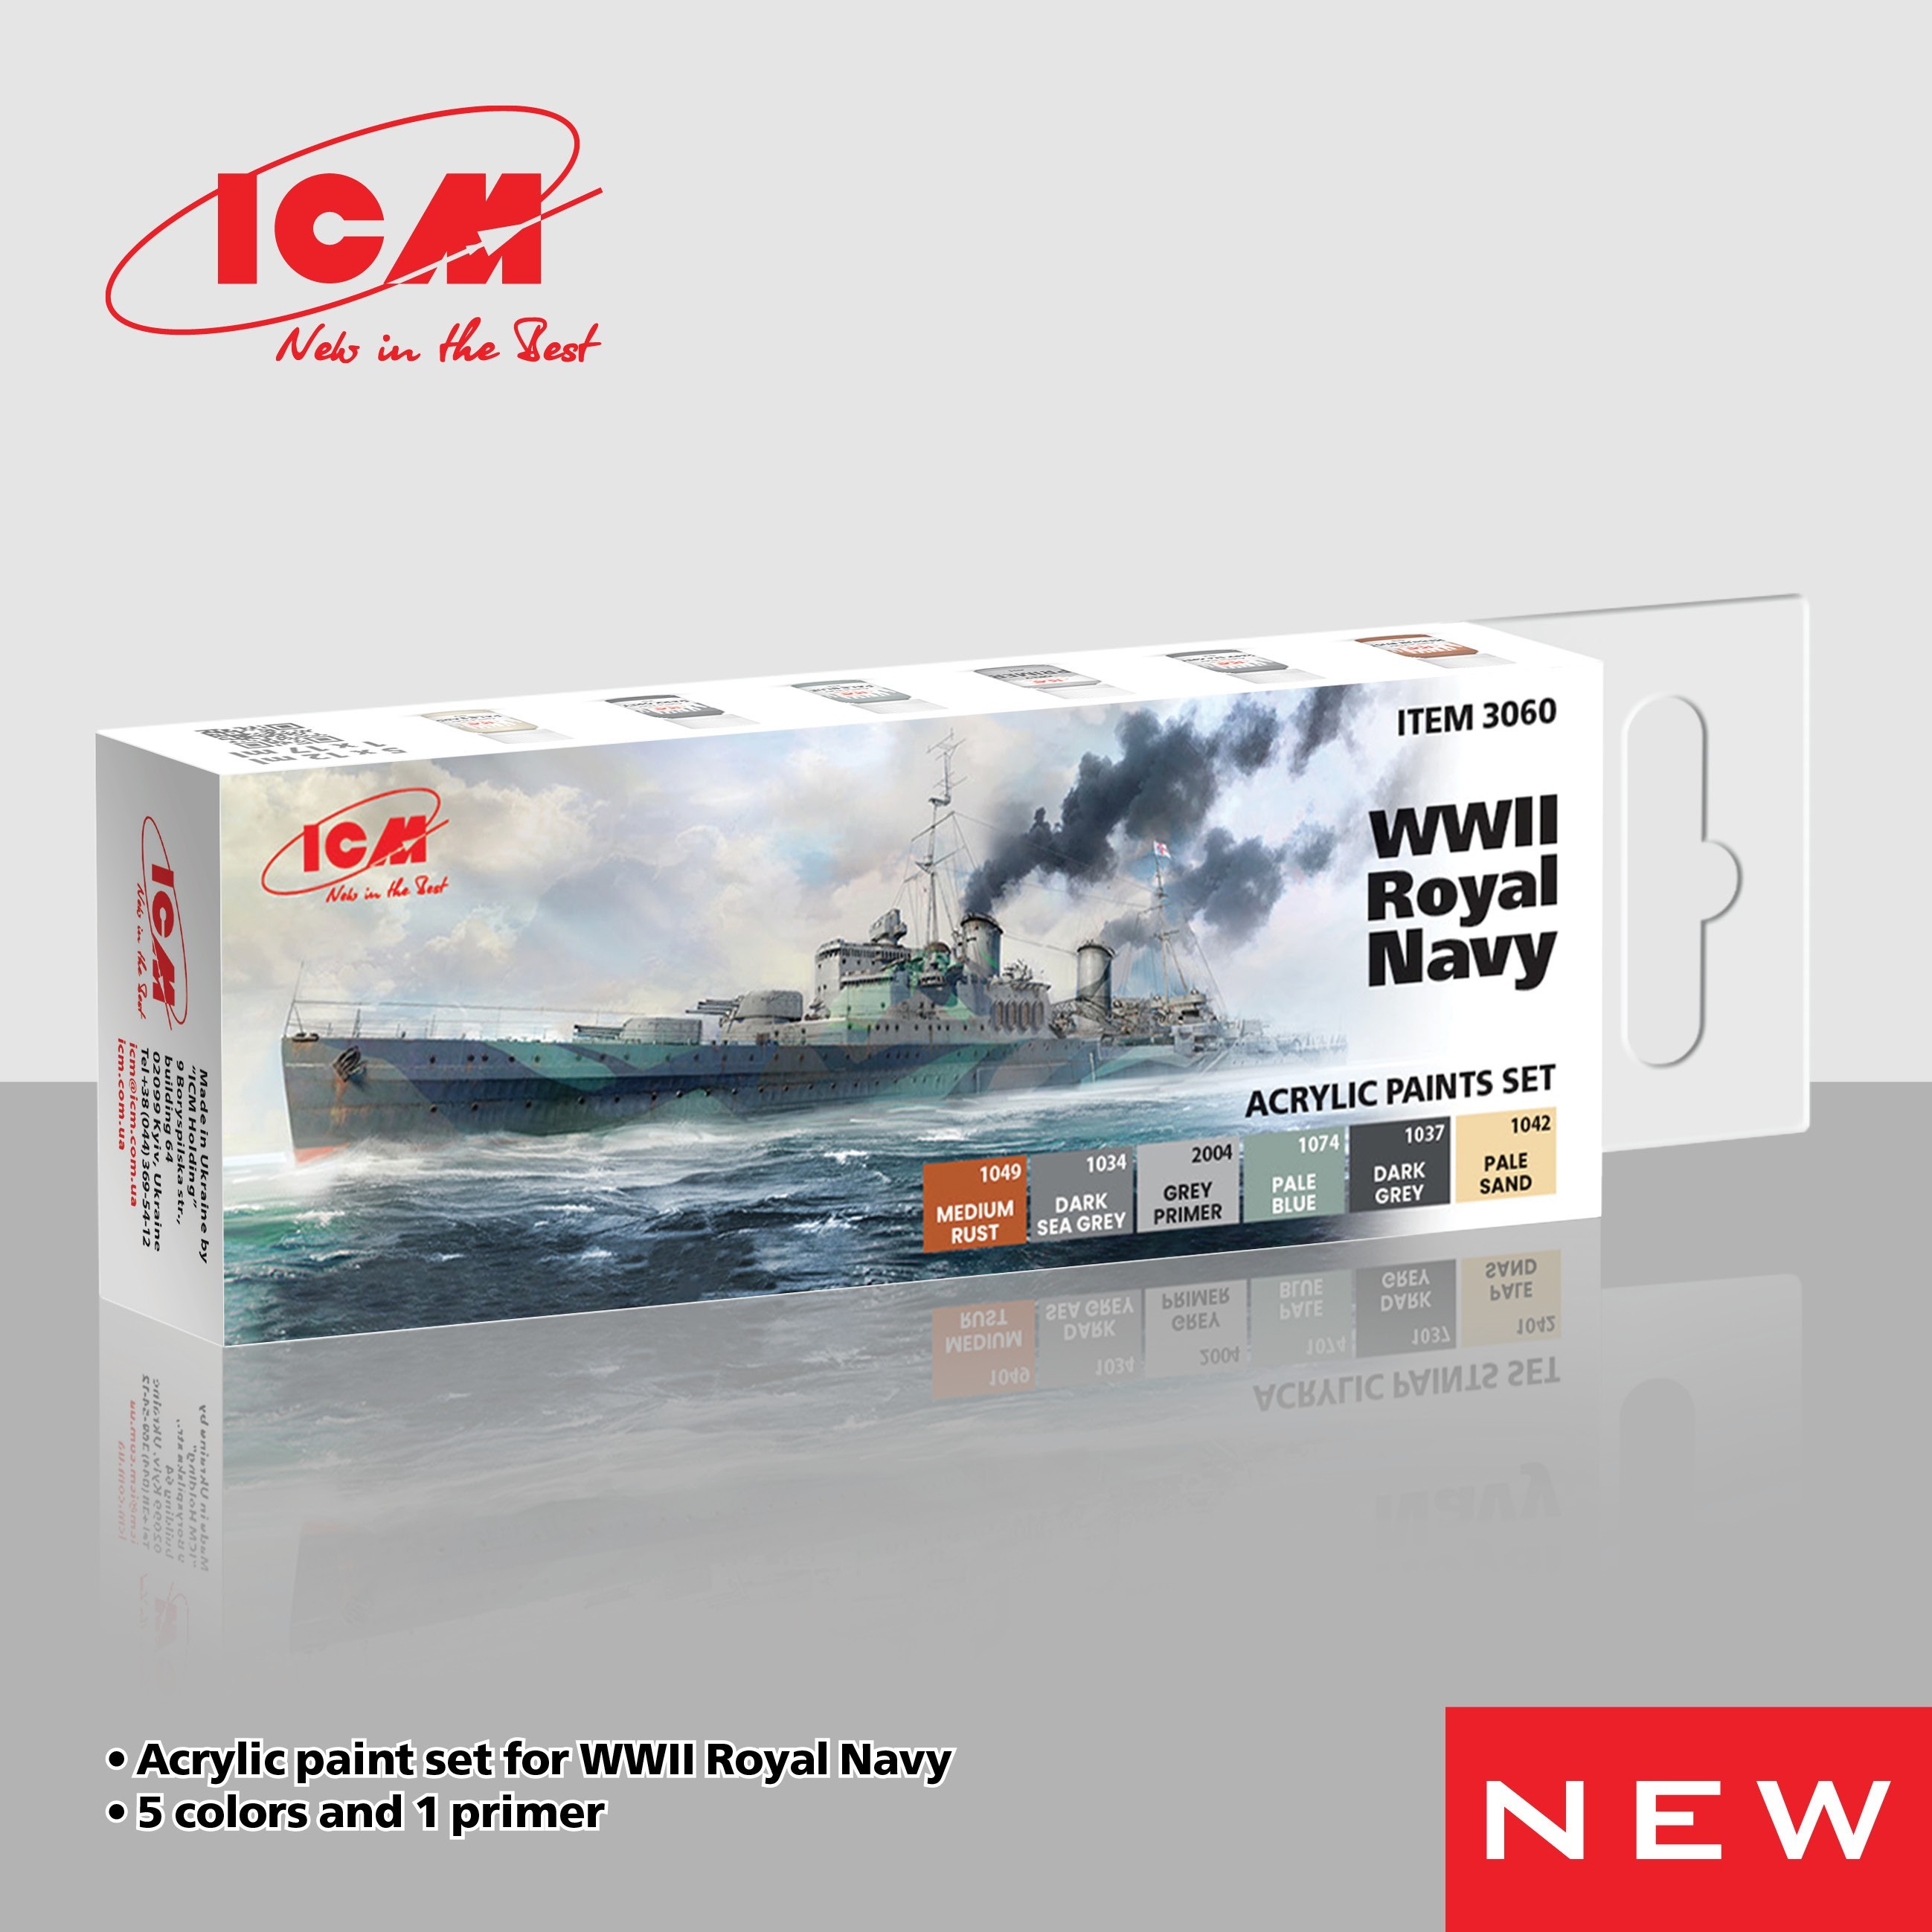 Acrylic paints set for WWII Royal Navy